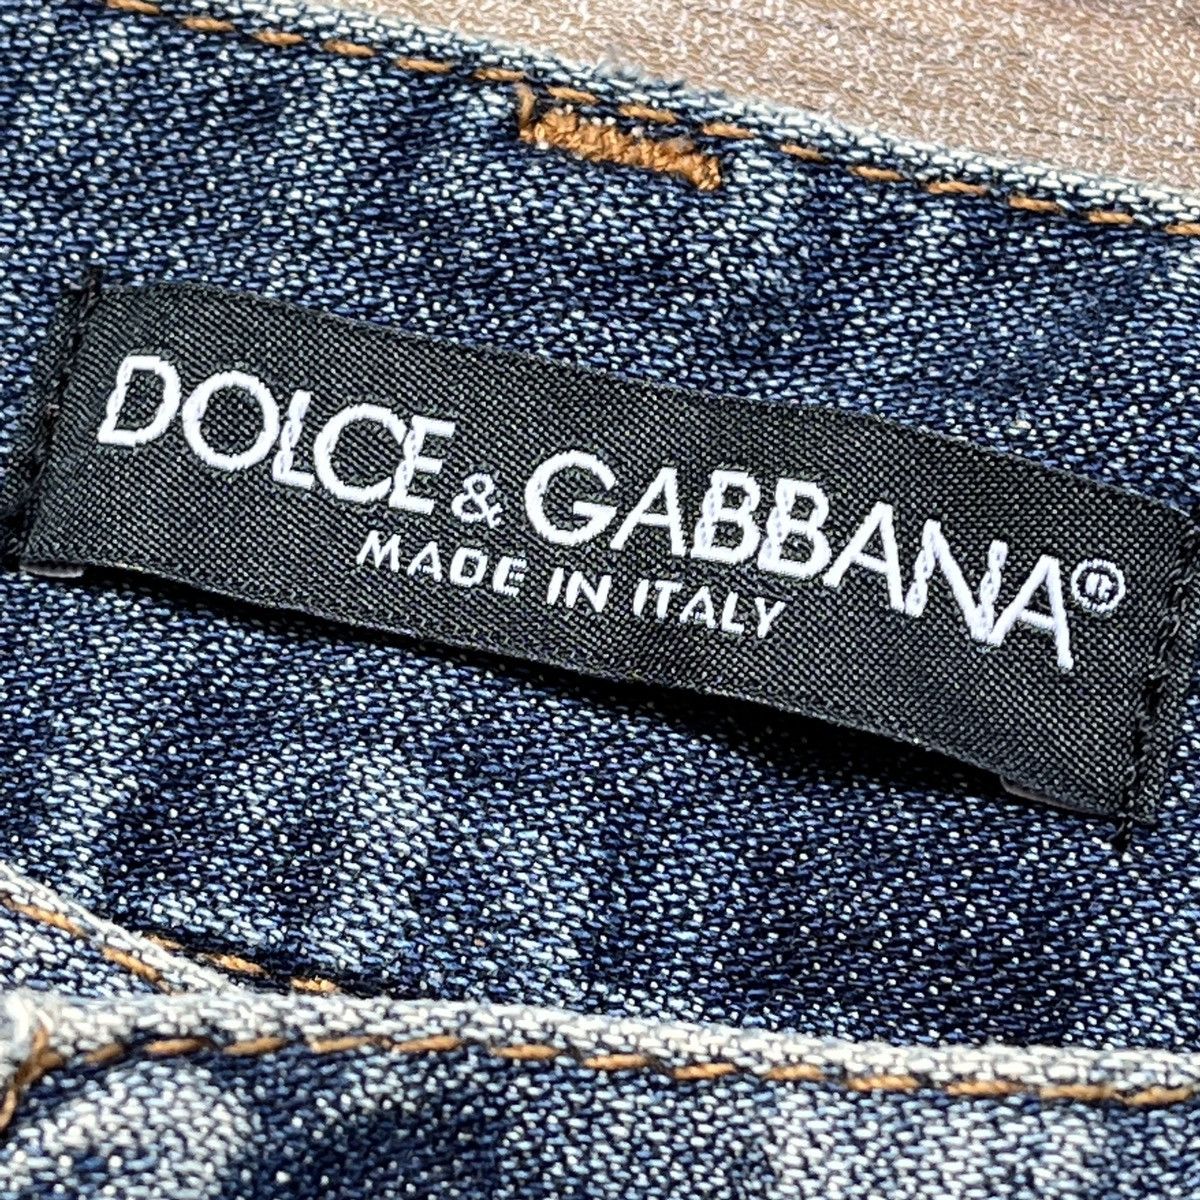 Distressed Dolce & Gabbana Vintage Made In Italy - 7